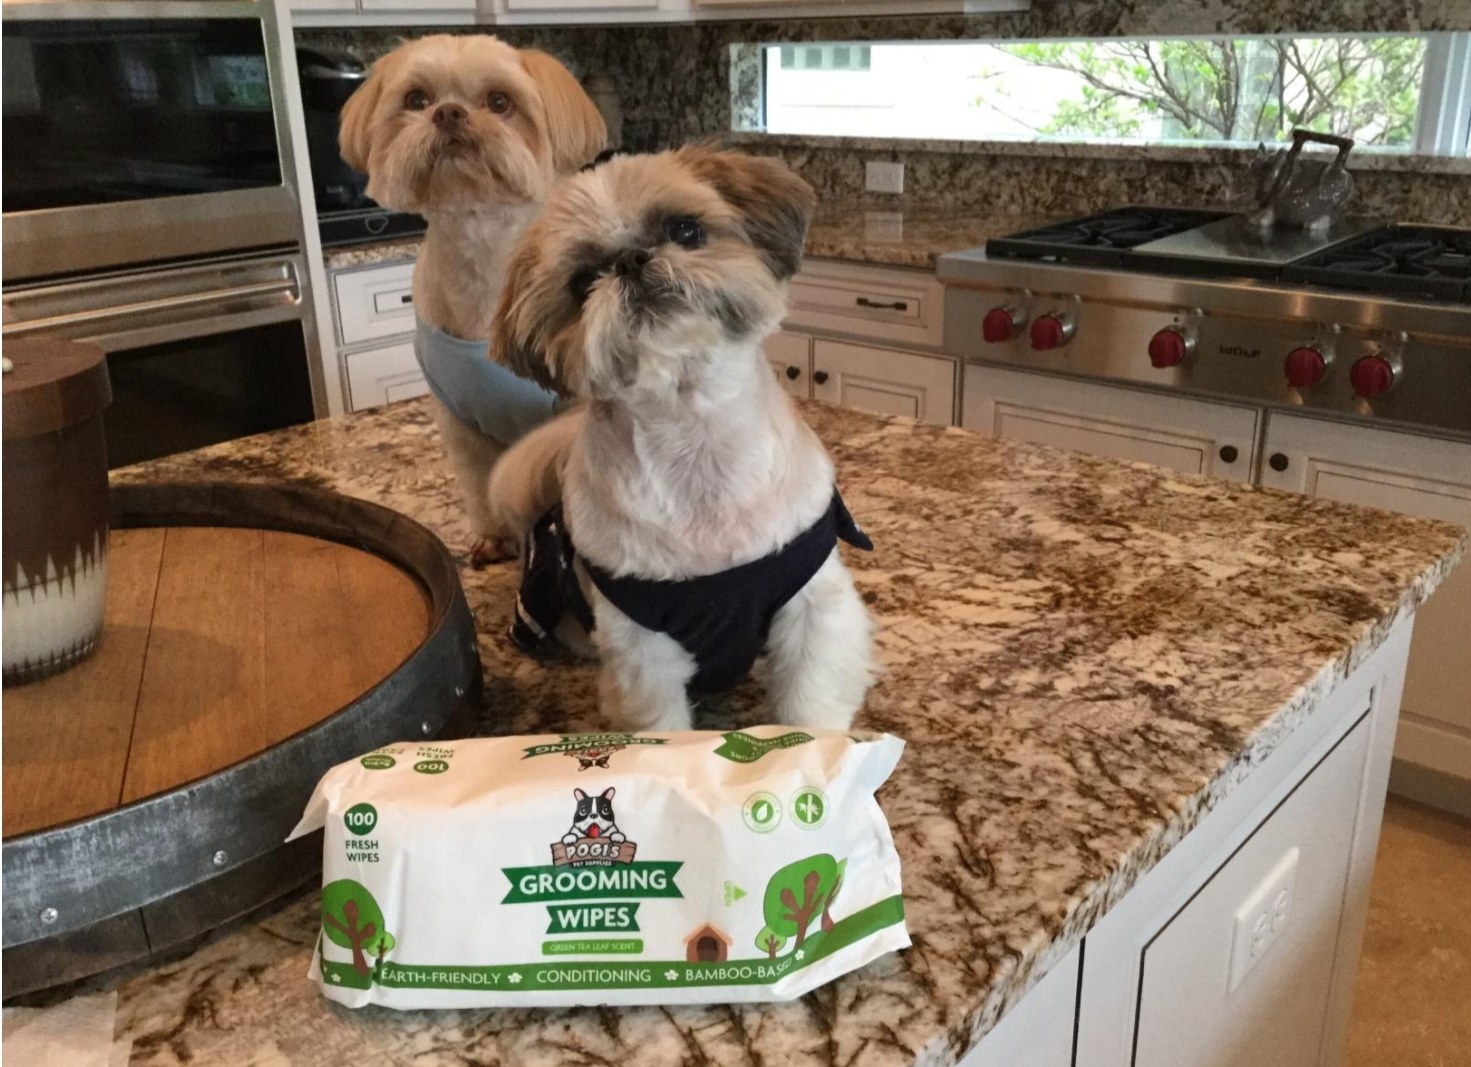 Two dogs sitting with the pack of grooming wipes